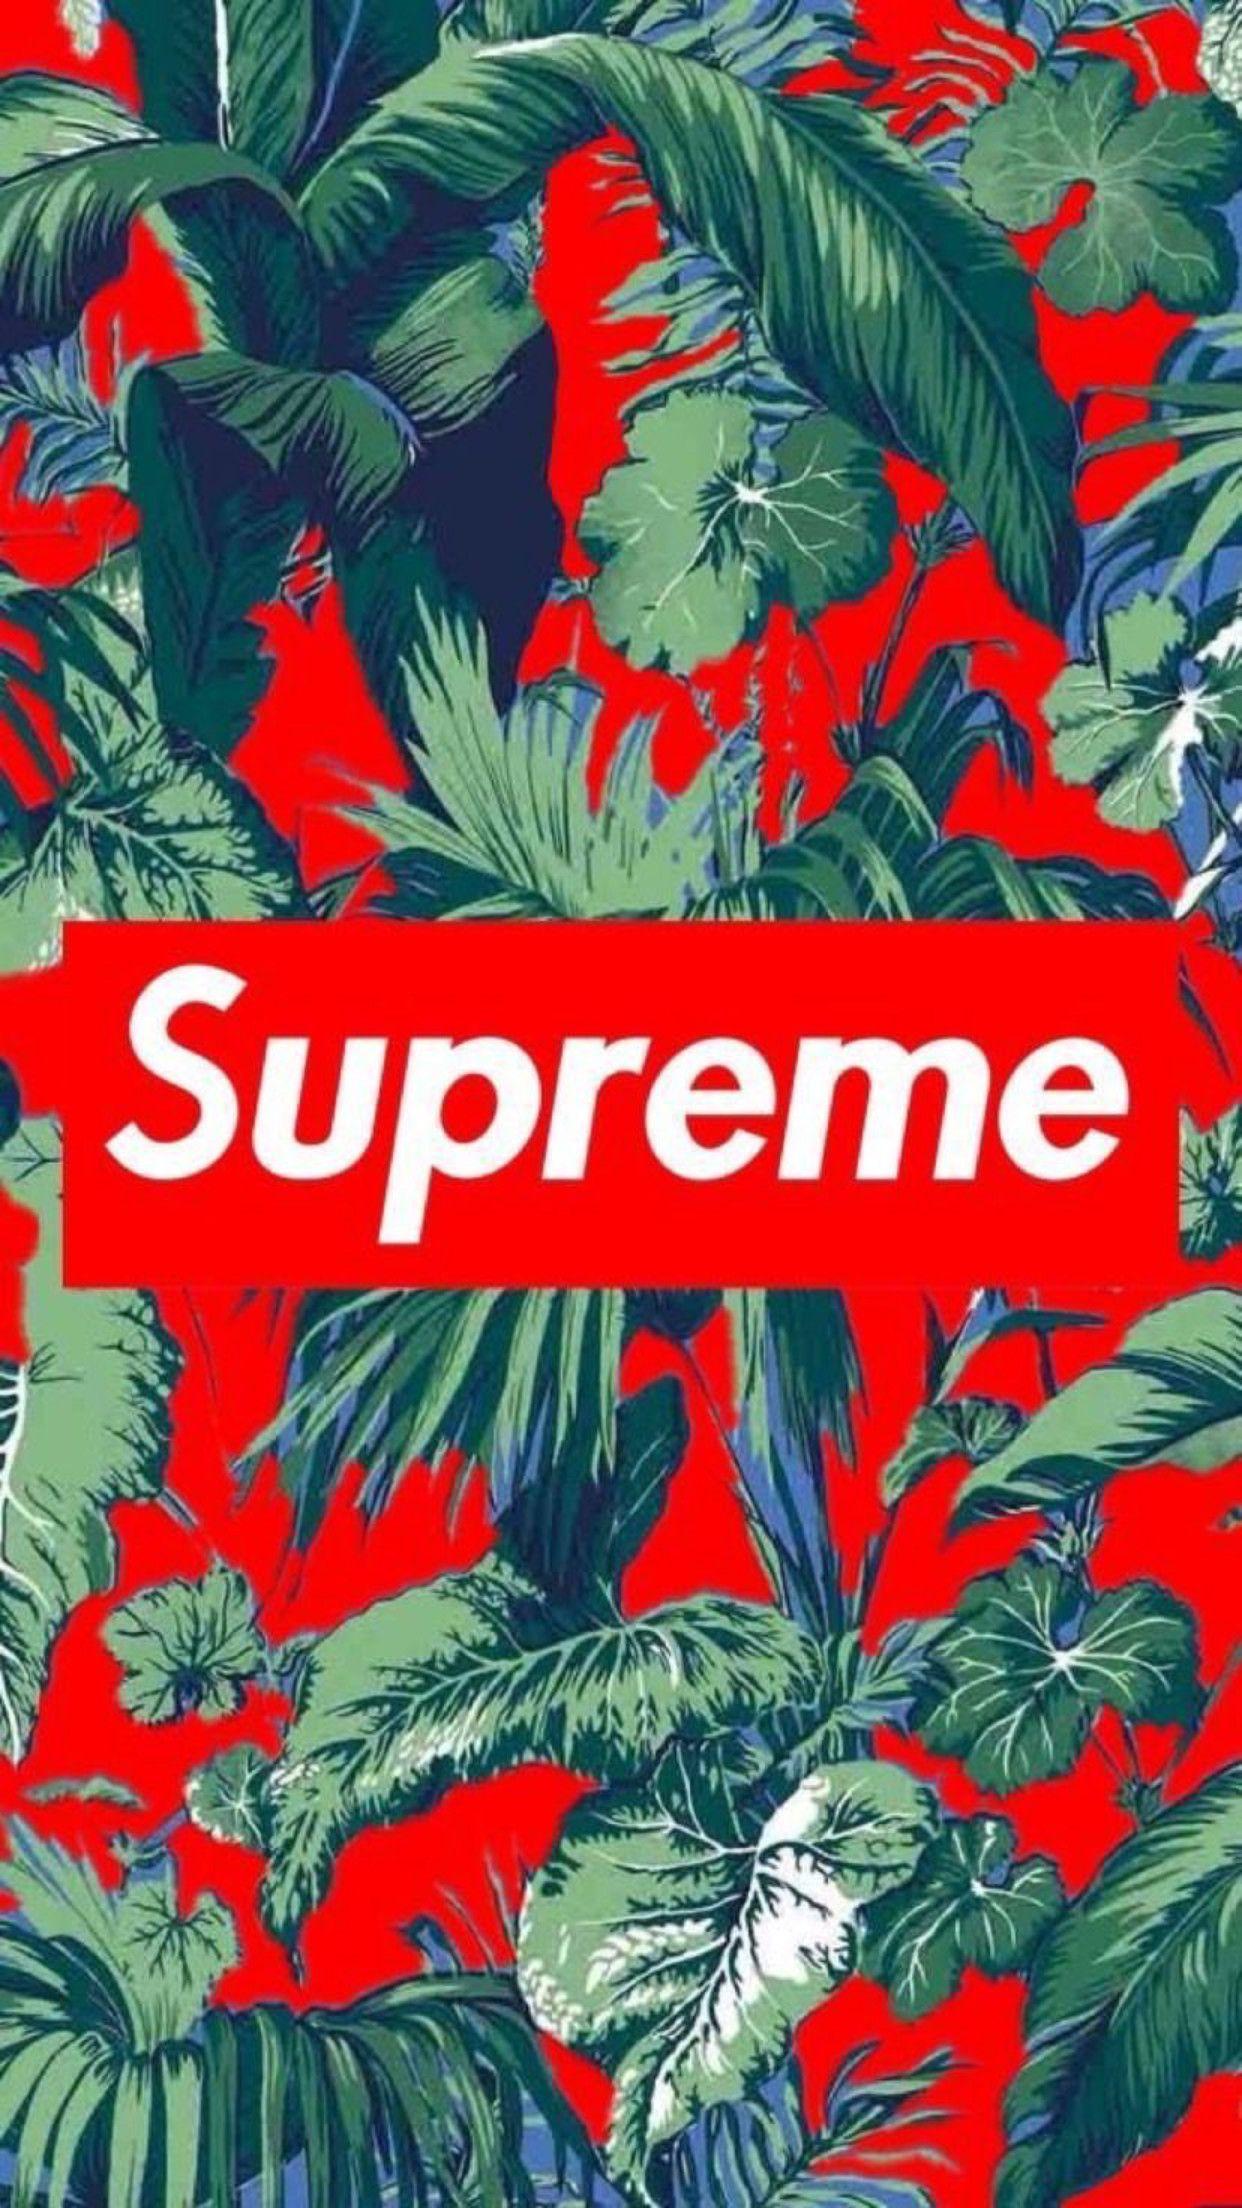 Free download the Supreme Mobile All HD wallpaper ,beaty your